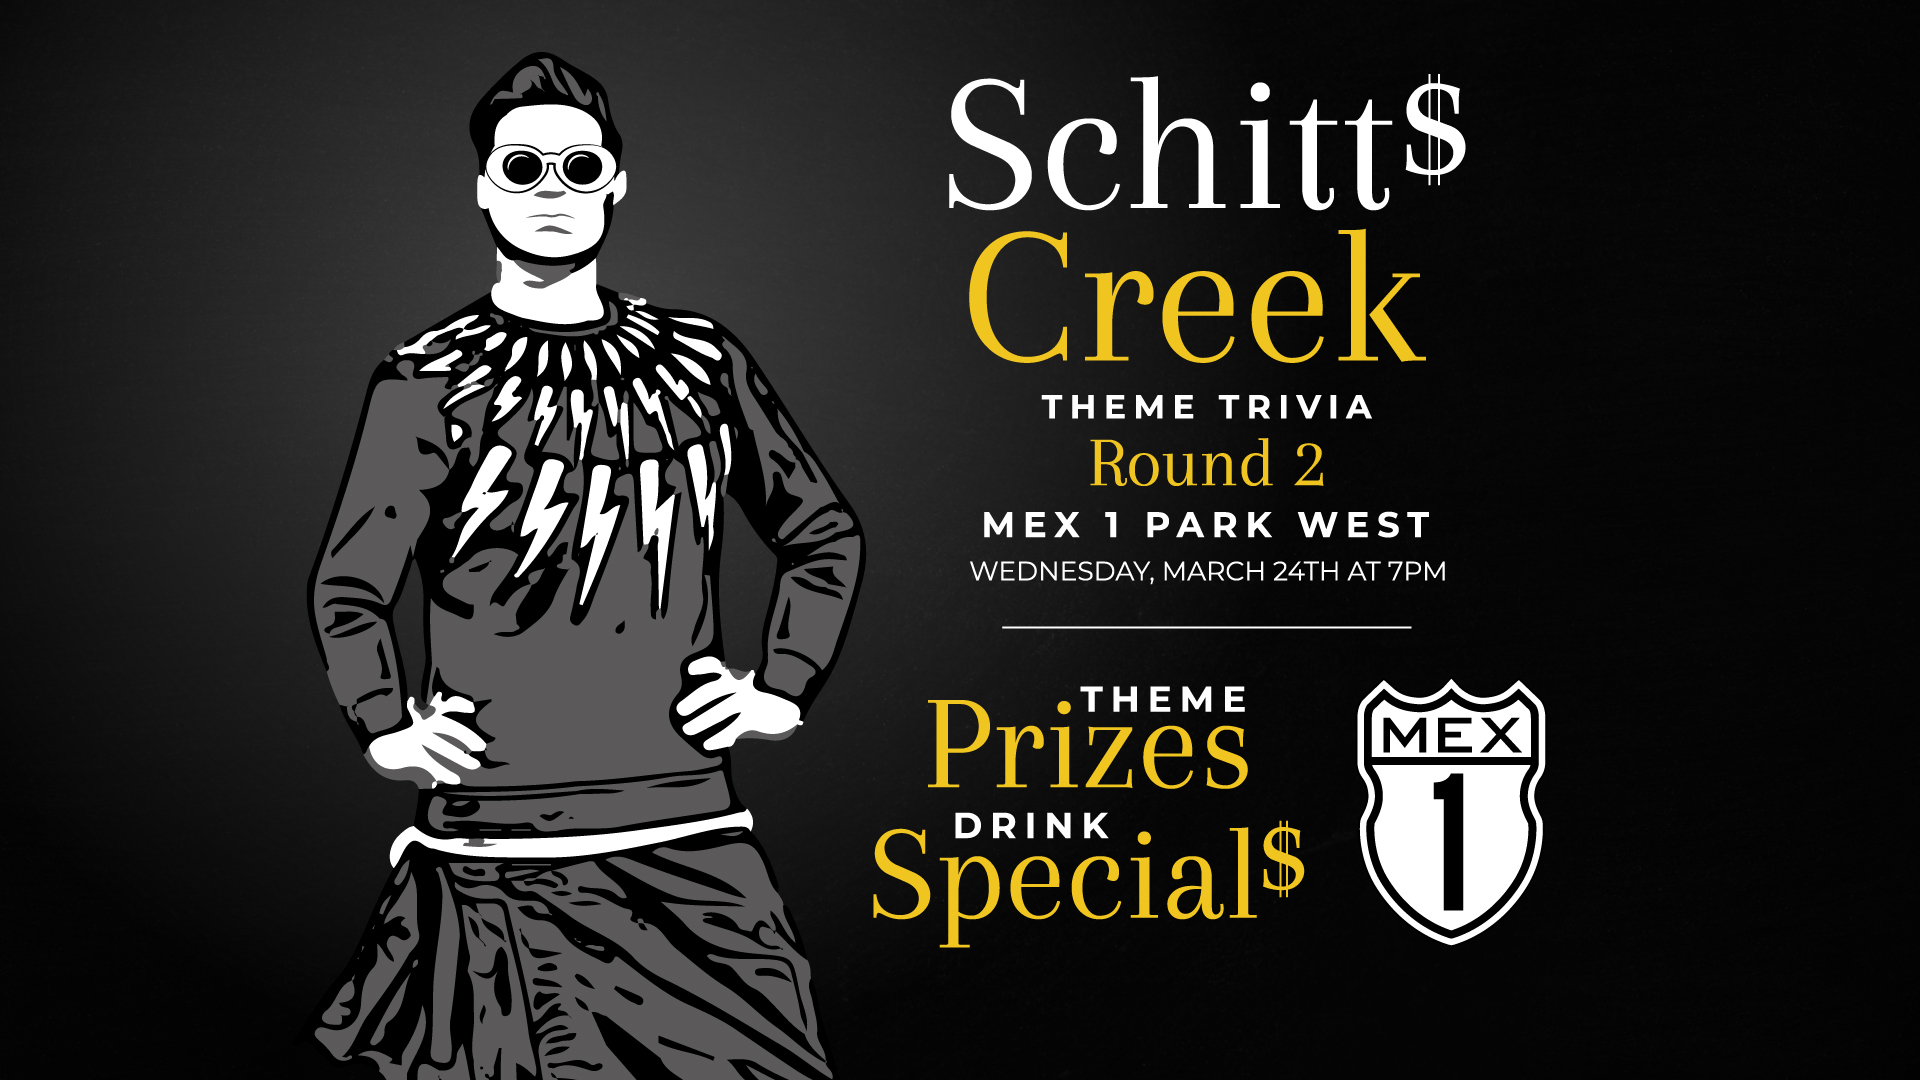 Schitts Creek Theme Trivia at Mex 1 Park West on Wednesday, March 24th